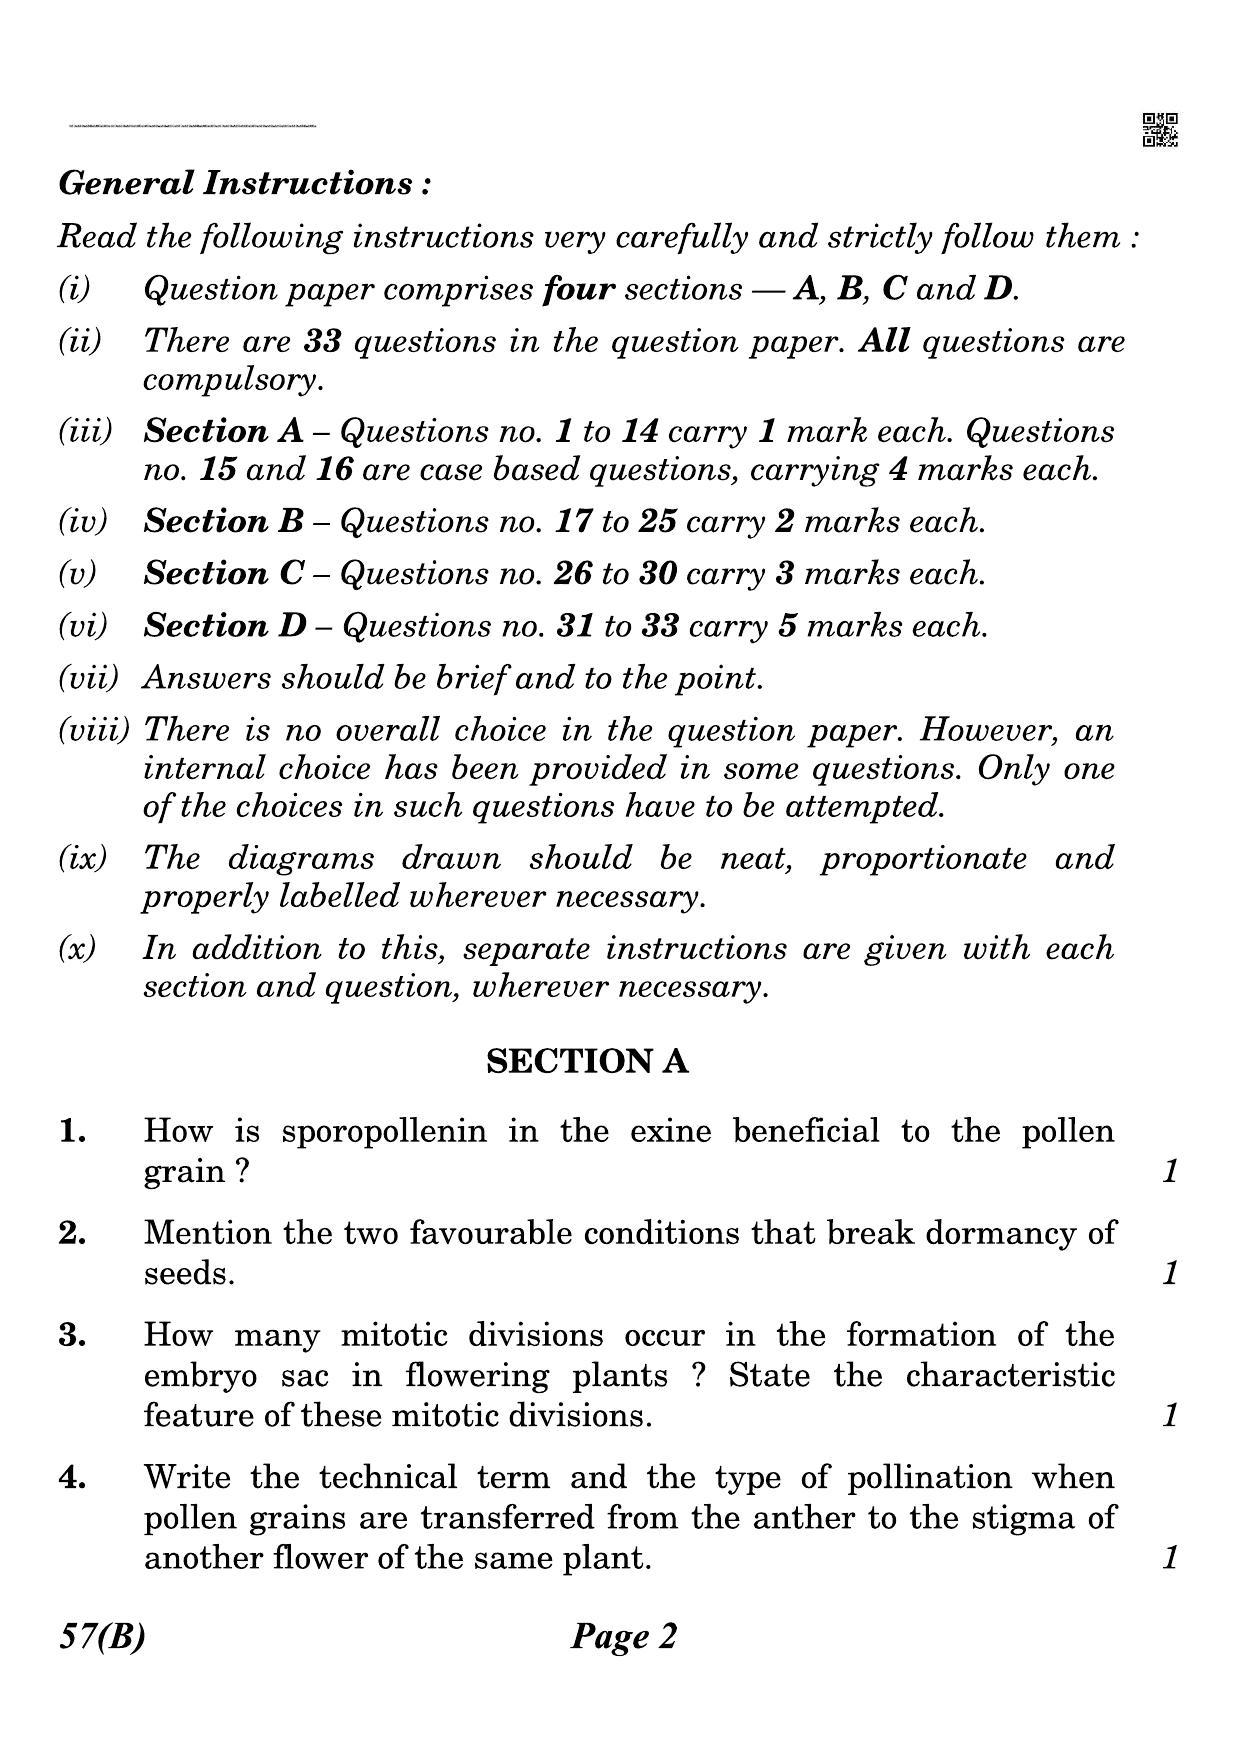 CBSE Class 12 QP_044_biology_for_visually_impared_candidates 2021 Compartment Question Paper - Page 2